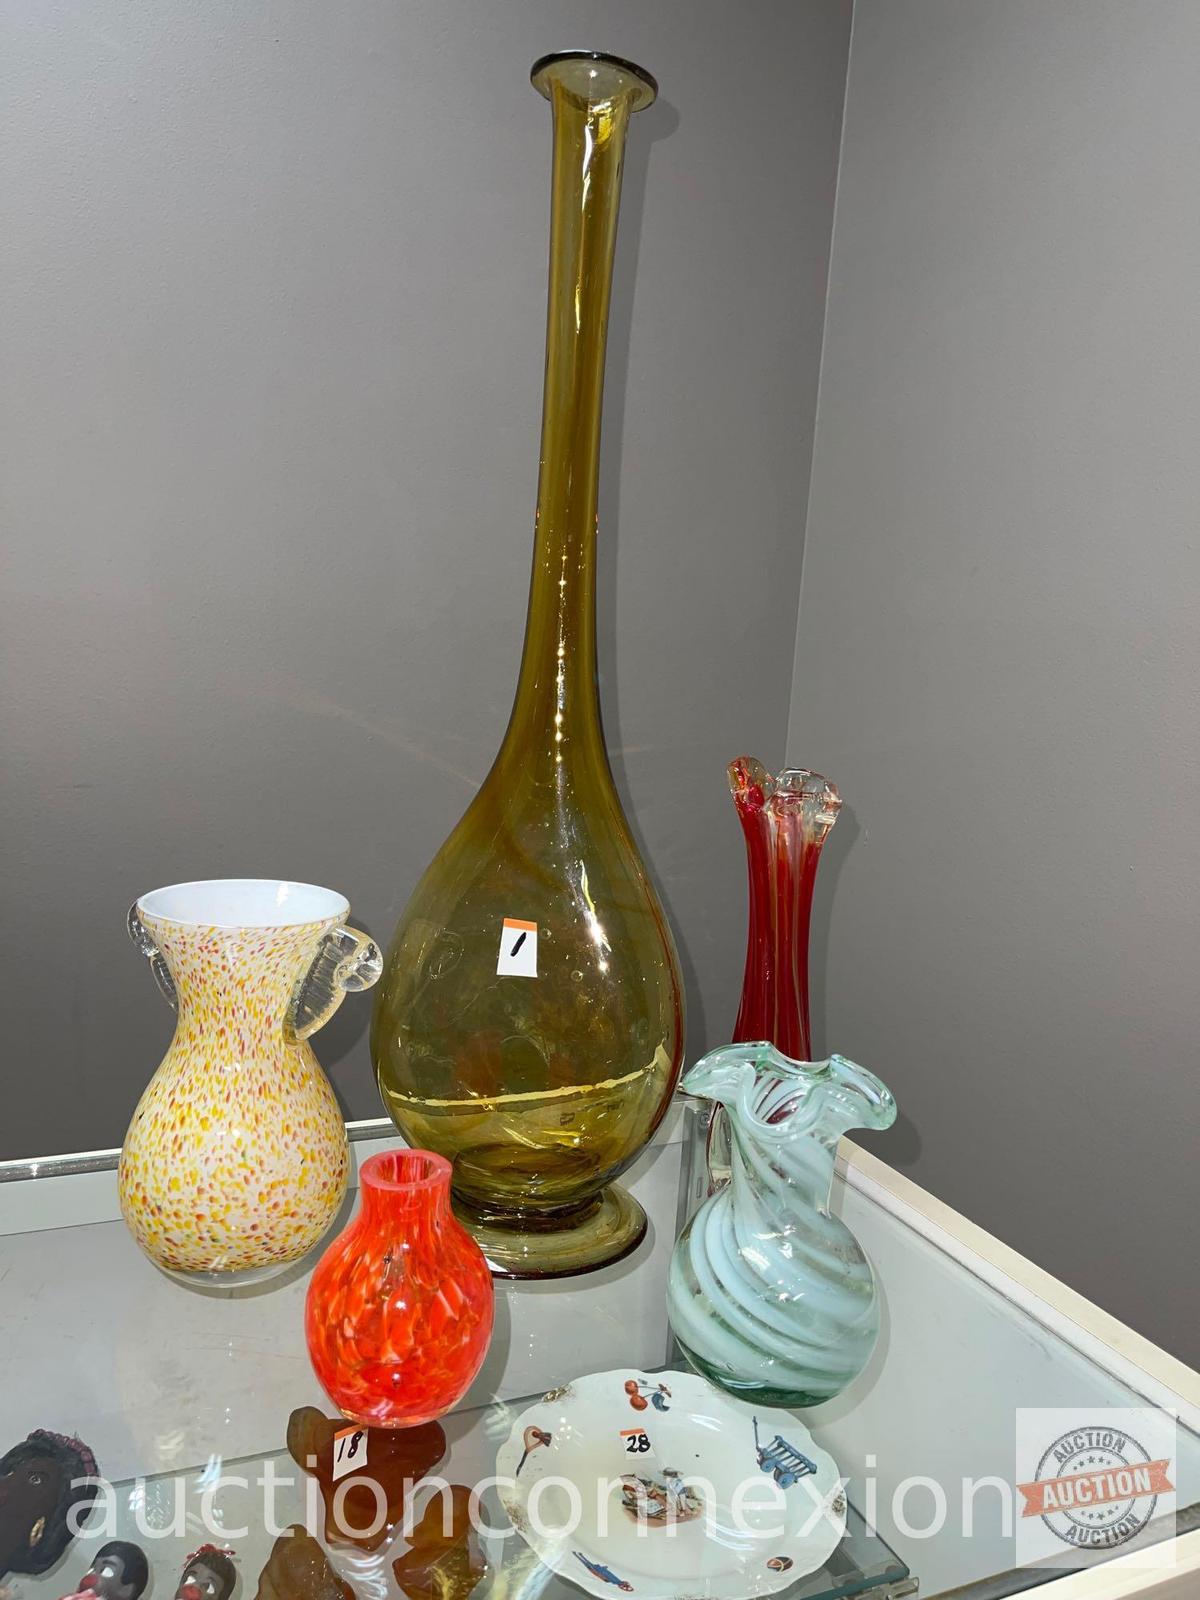 5 Art glass vases, some hand blown, 20.5" tall amber color, 3.5", 5.5", 6.5", 9"